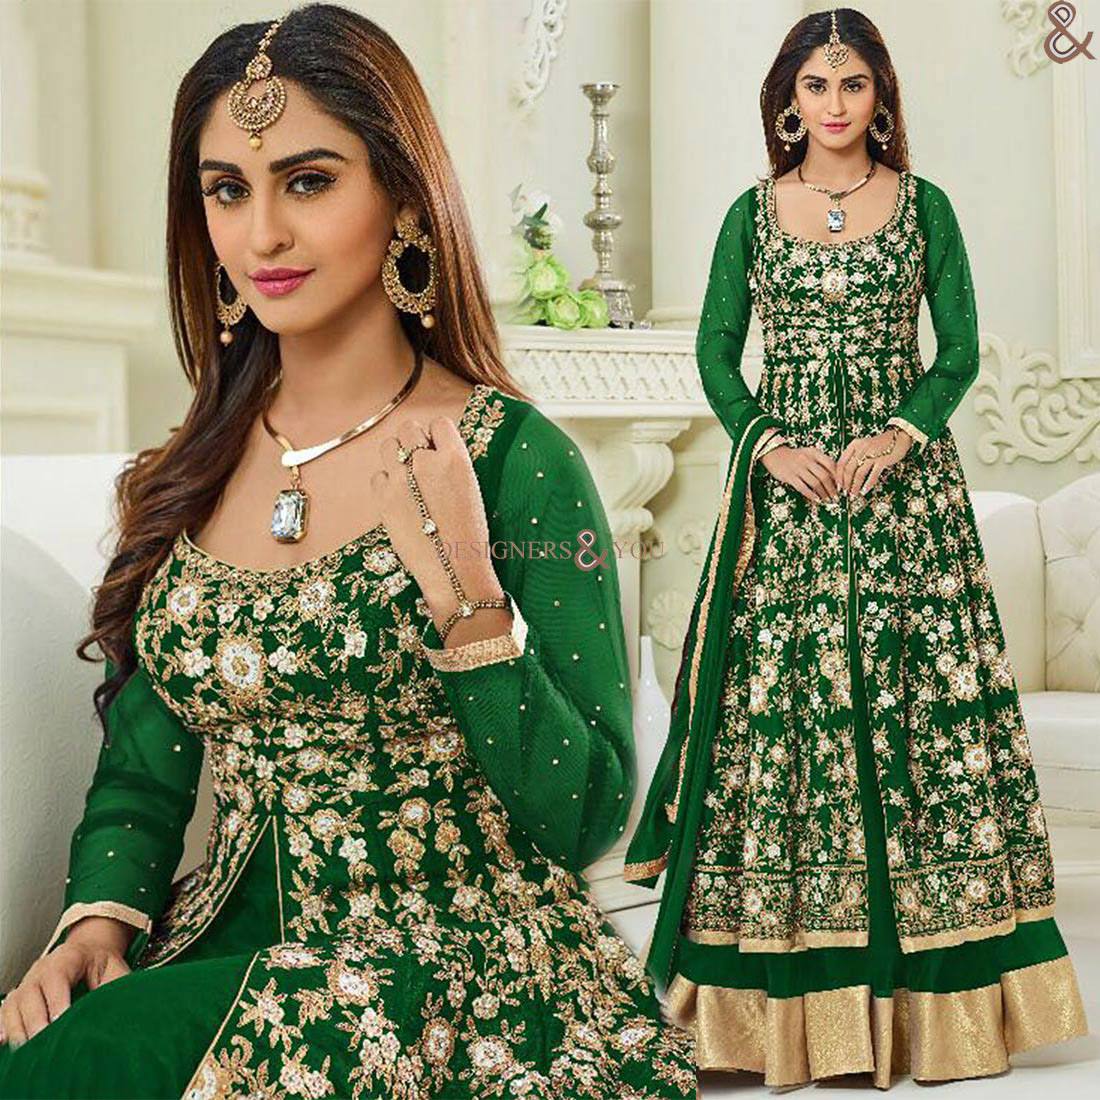 Bollywood Krystle D'Souza actress Designer dresses online Shopping Best Price Fashion  BollyWoodDresses checpest